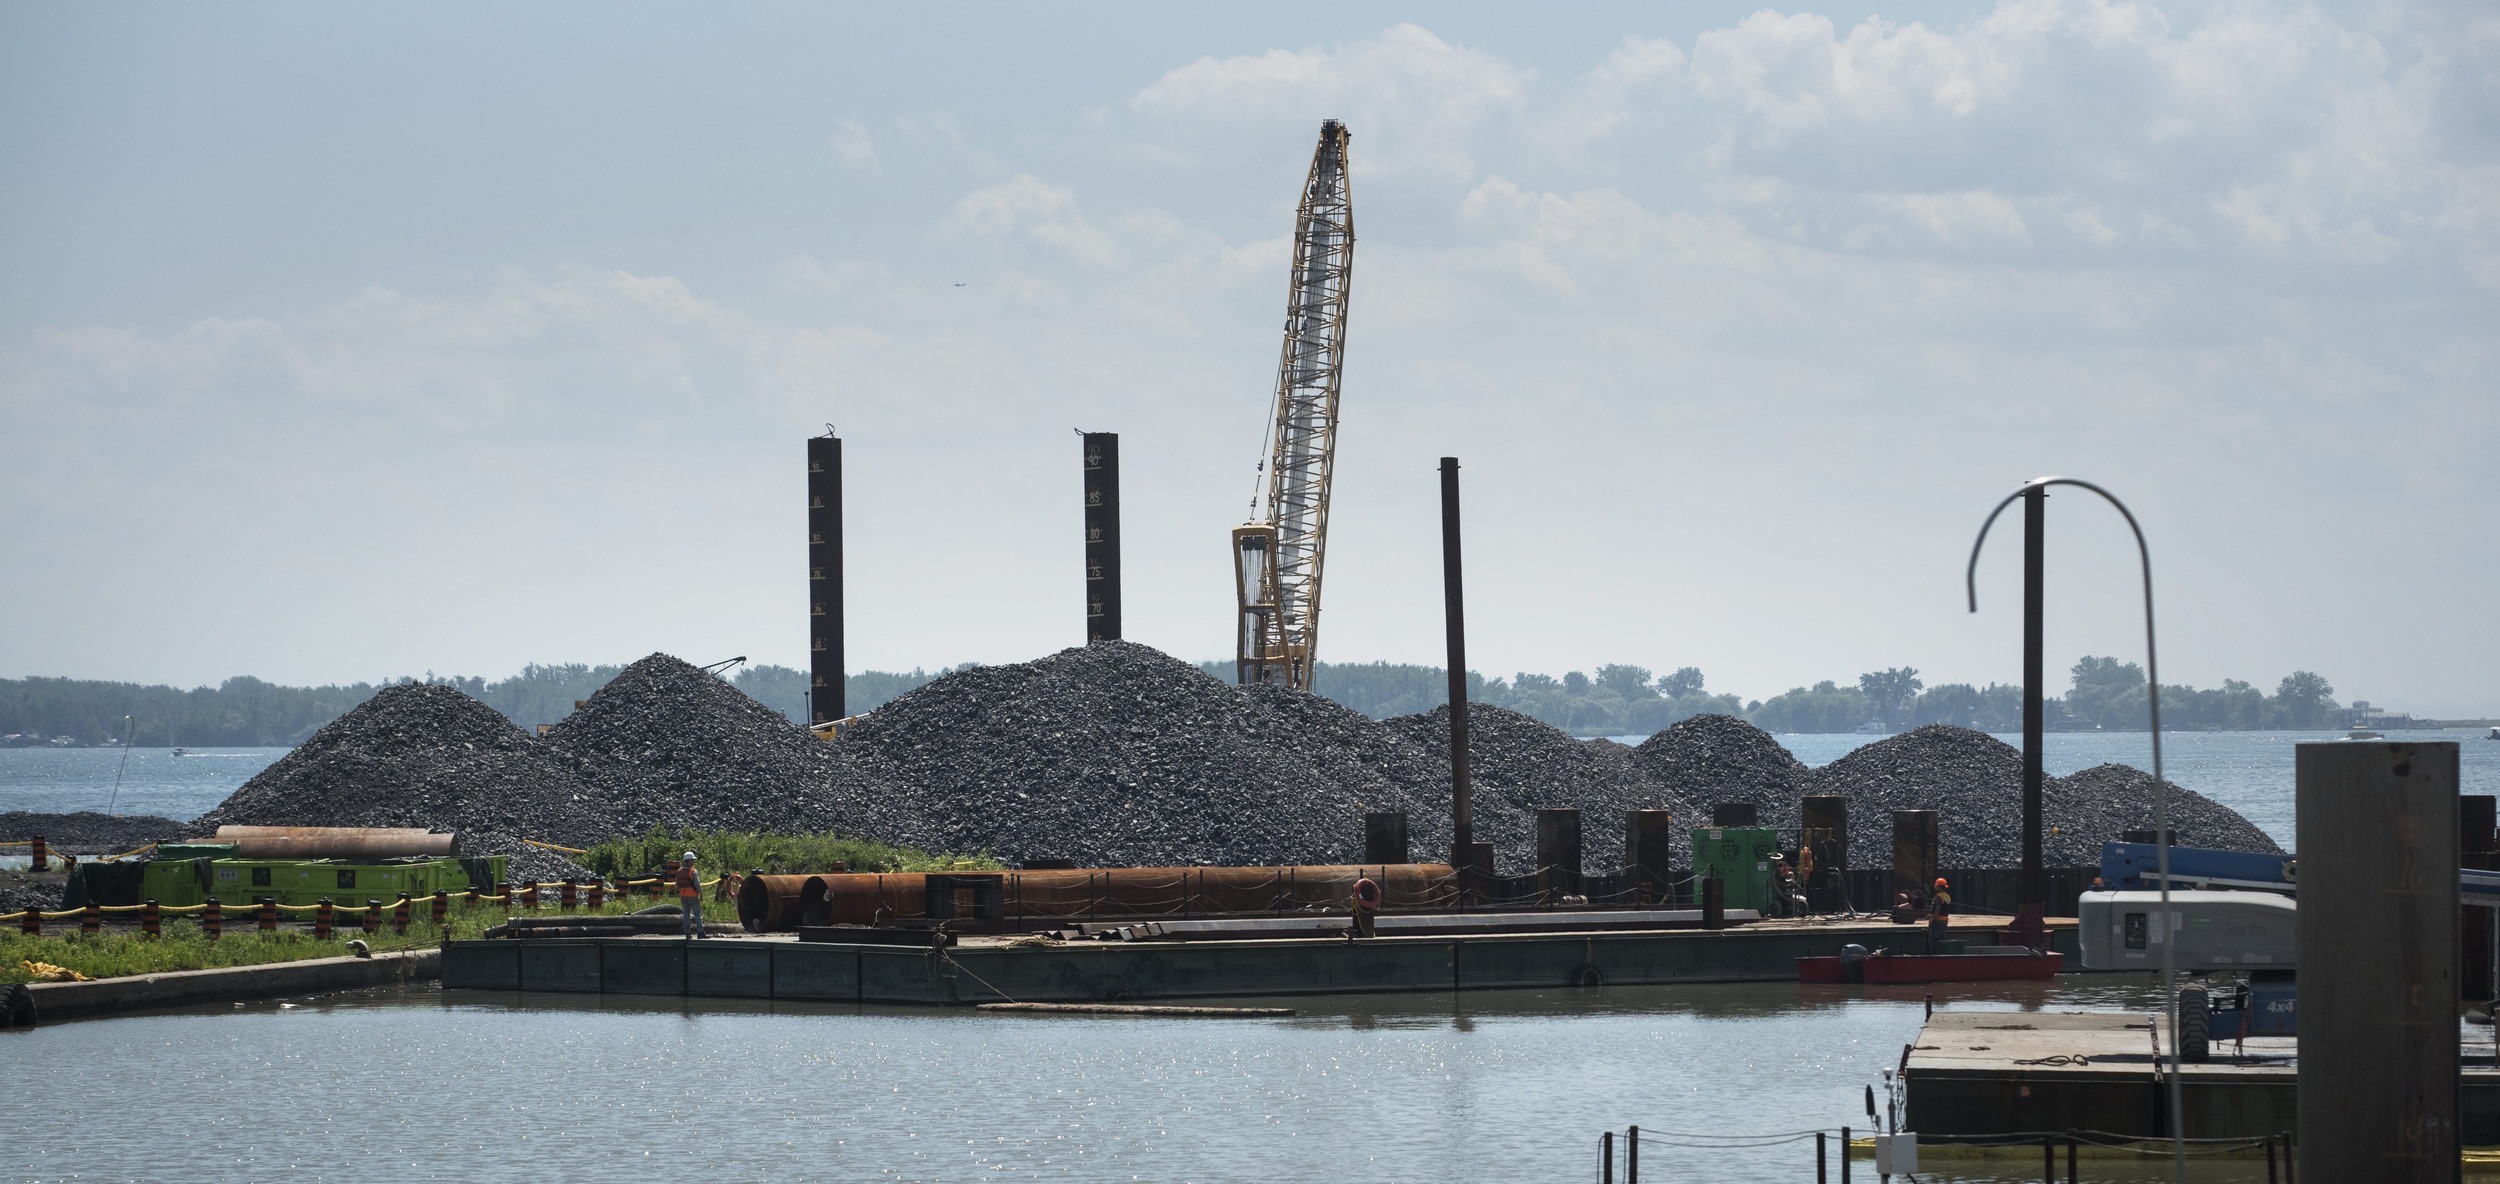 Piles of rock and a crane at the edge of a harbour